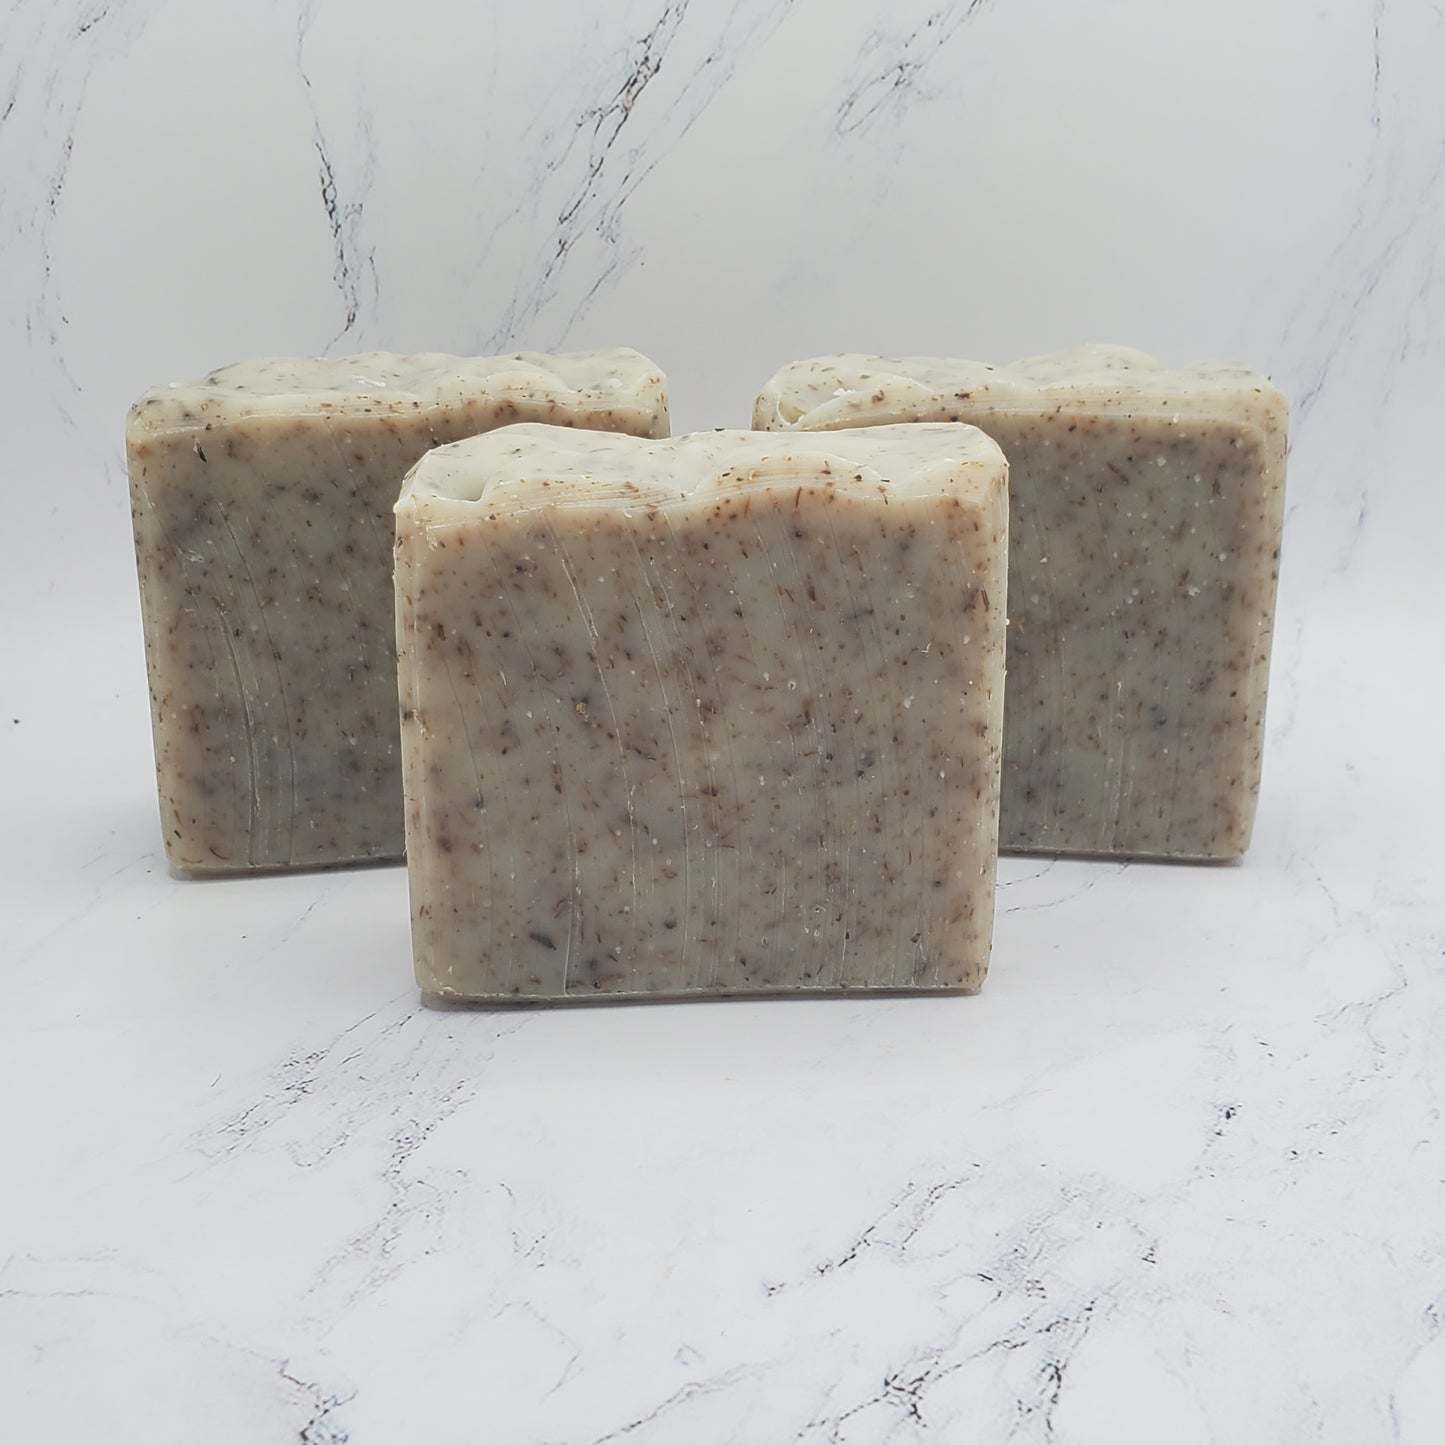 Lavender & Rice Bar Soap with Lavender and Cedarwood Essential Oils